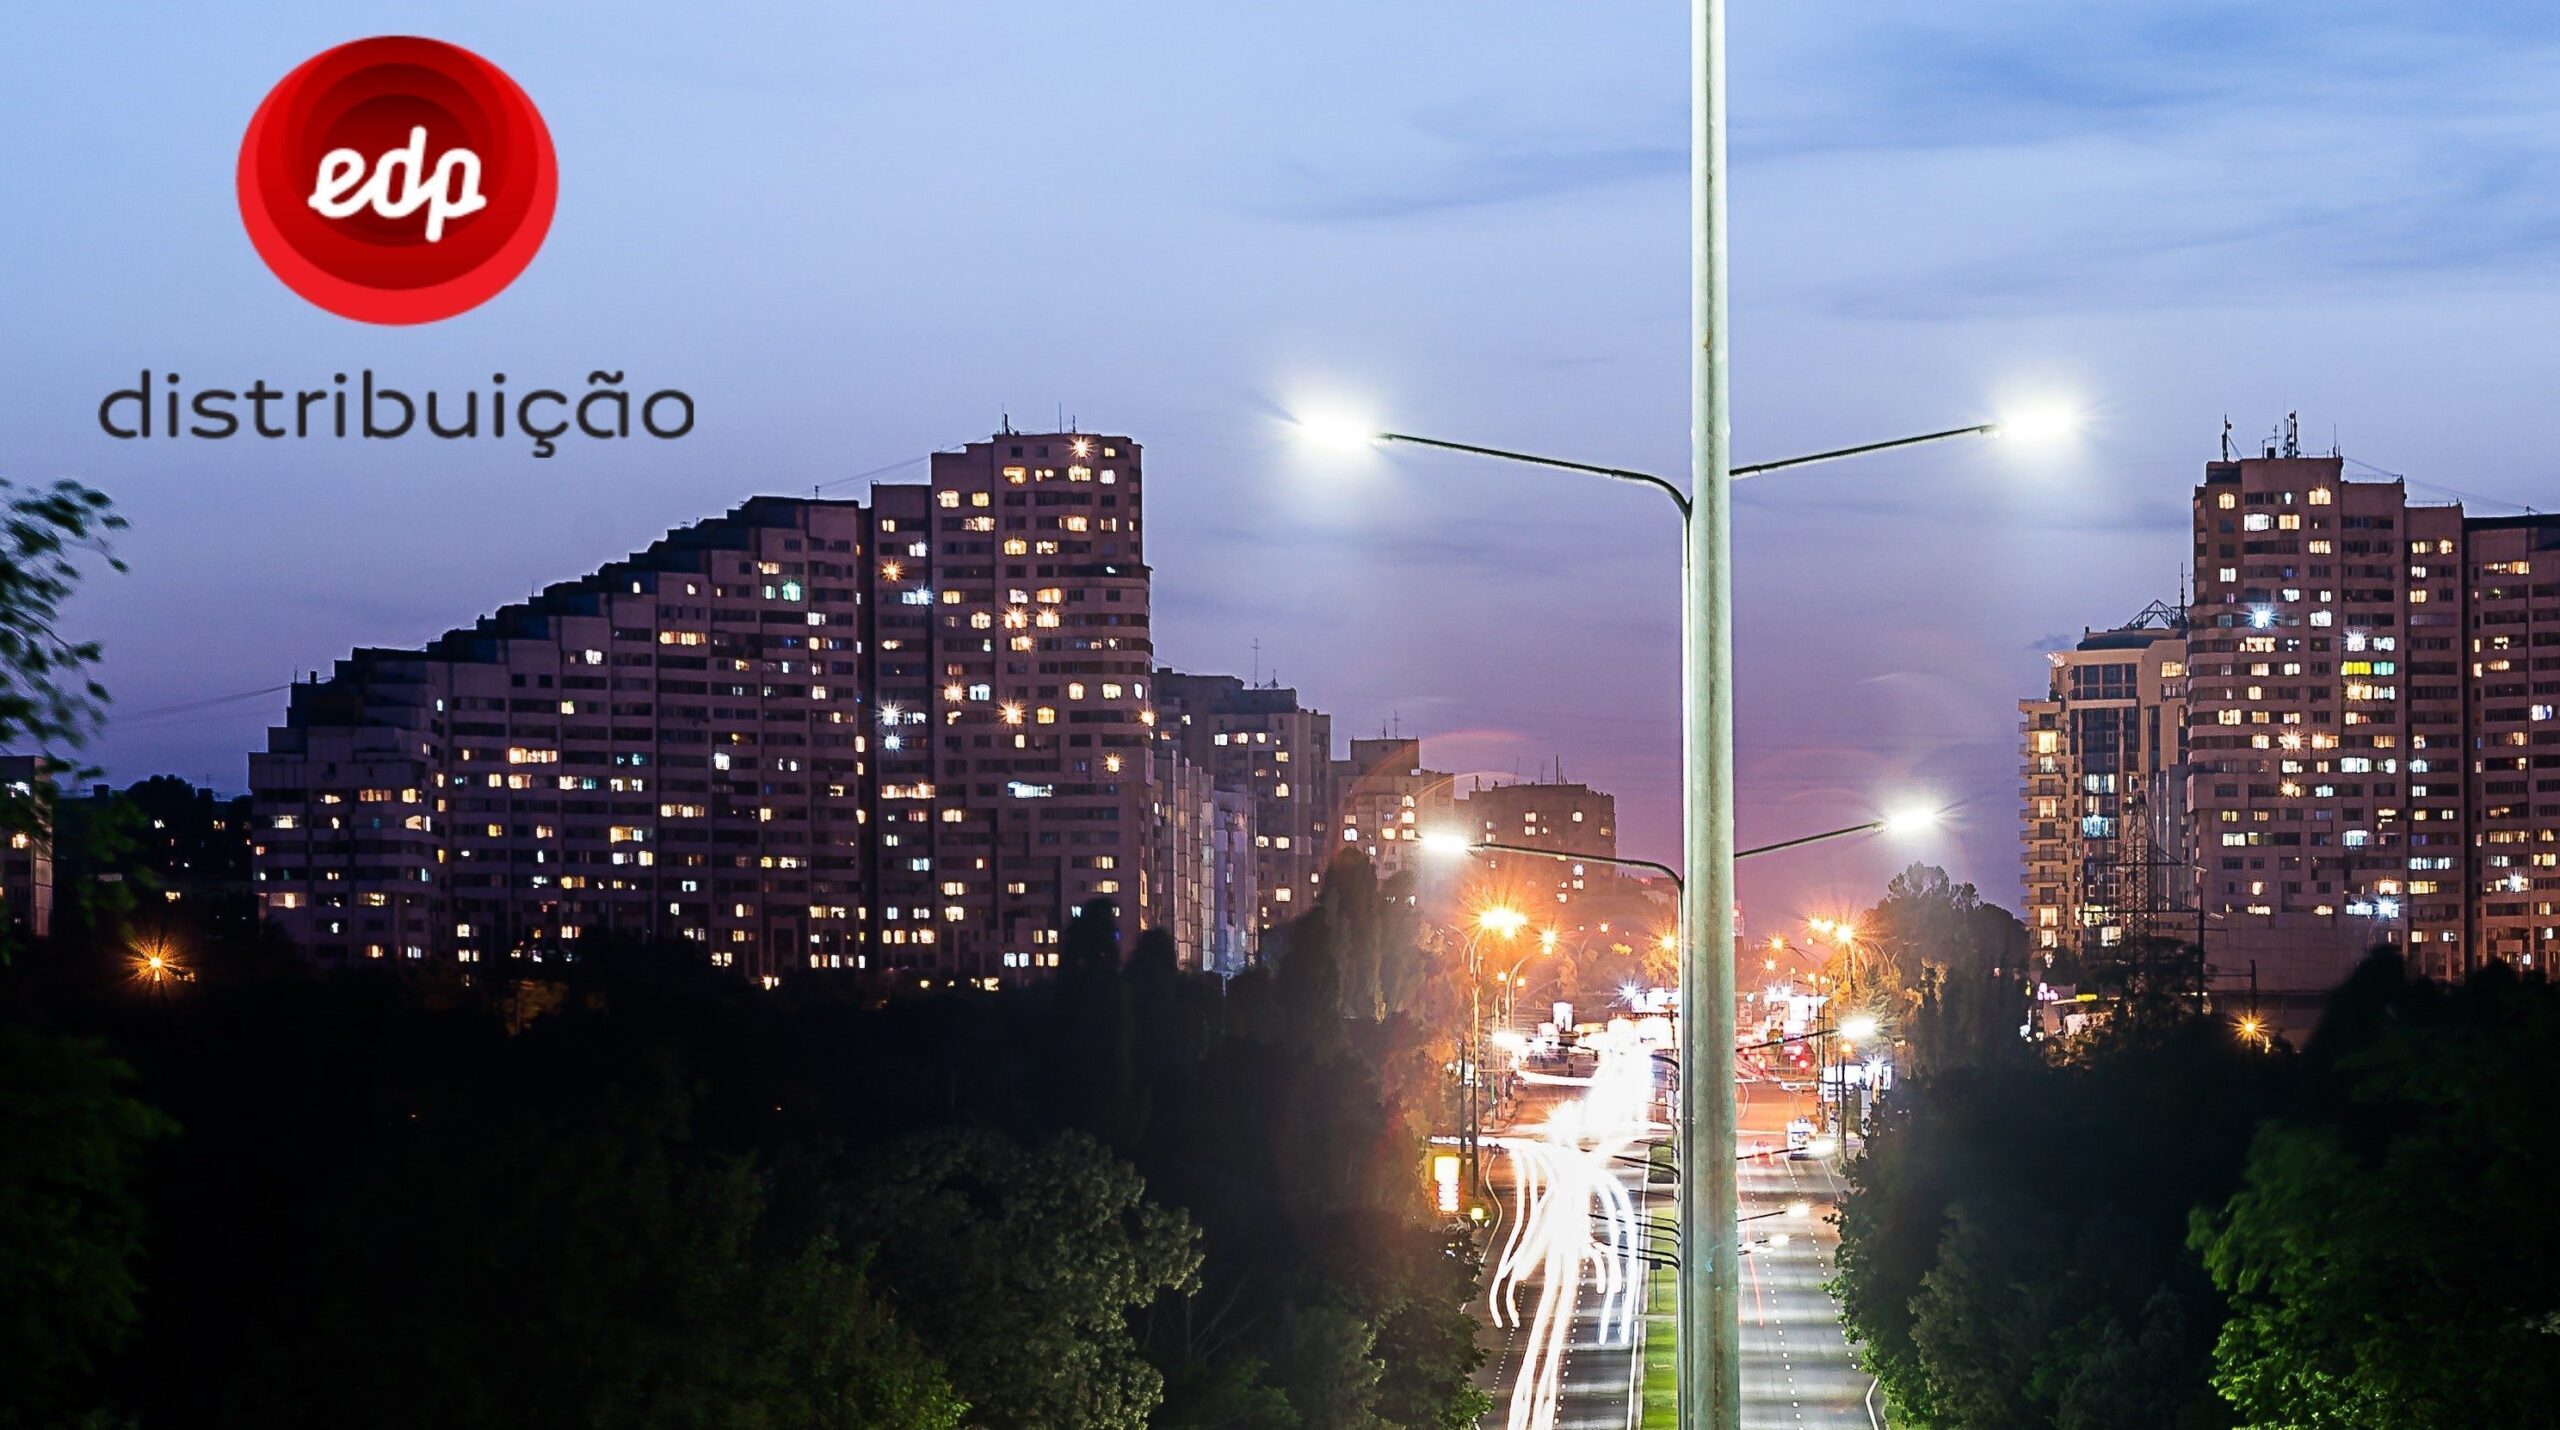 Meazon collaborates with EDP Distribuição to develop open standards technology in smart street lighting